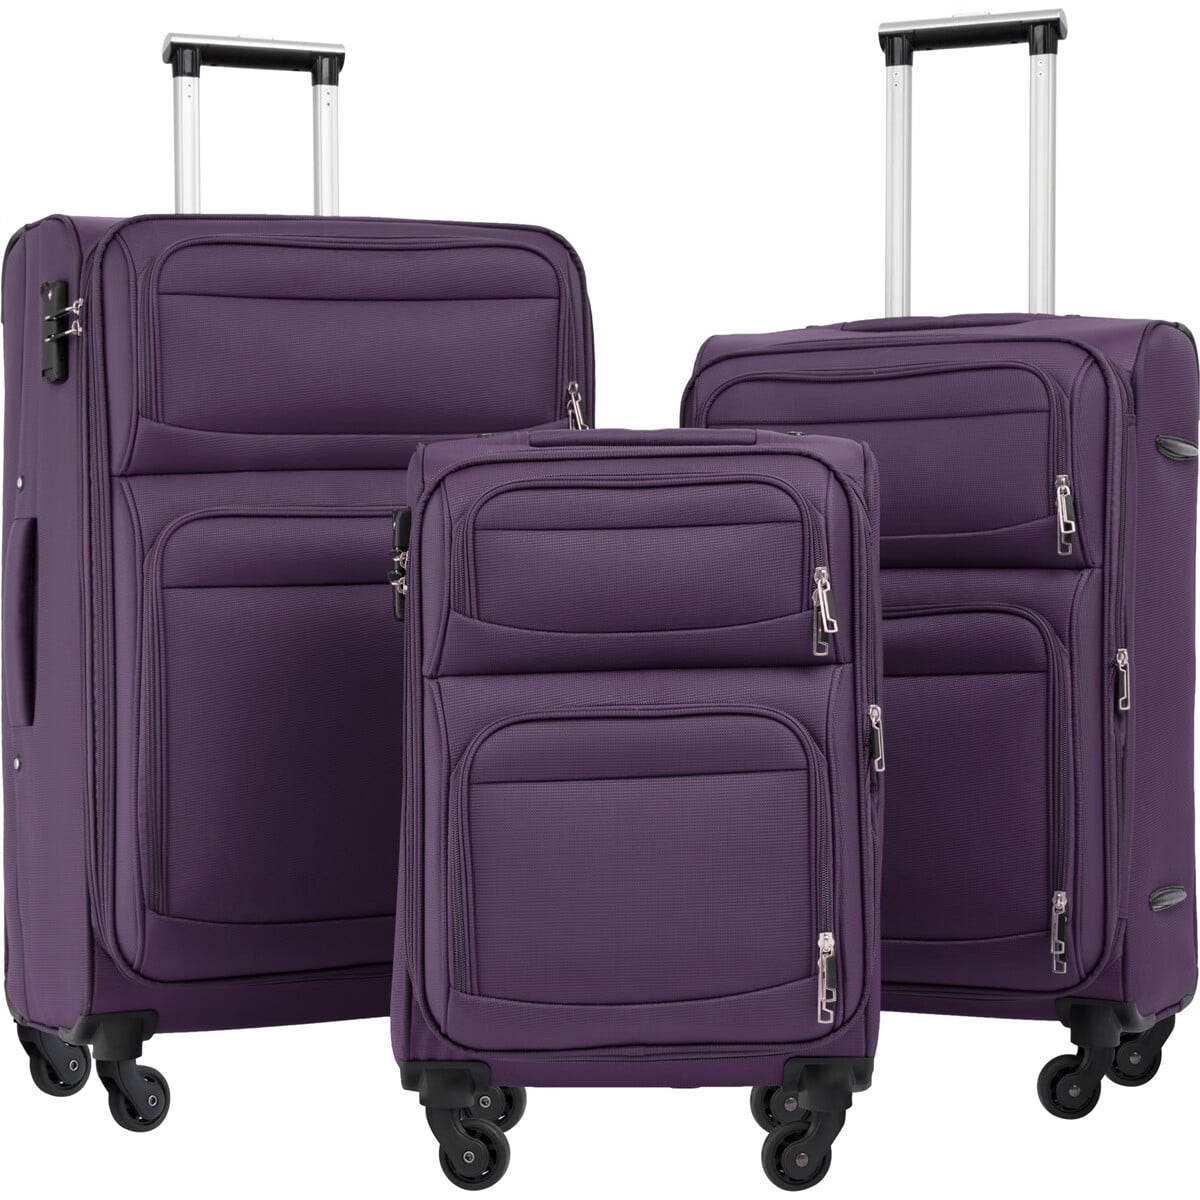 Lucas Ultra Lightweight 3 Pc Softside Expandable Spinner Luggage